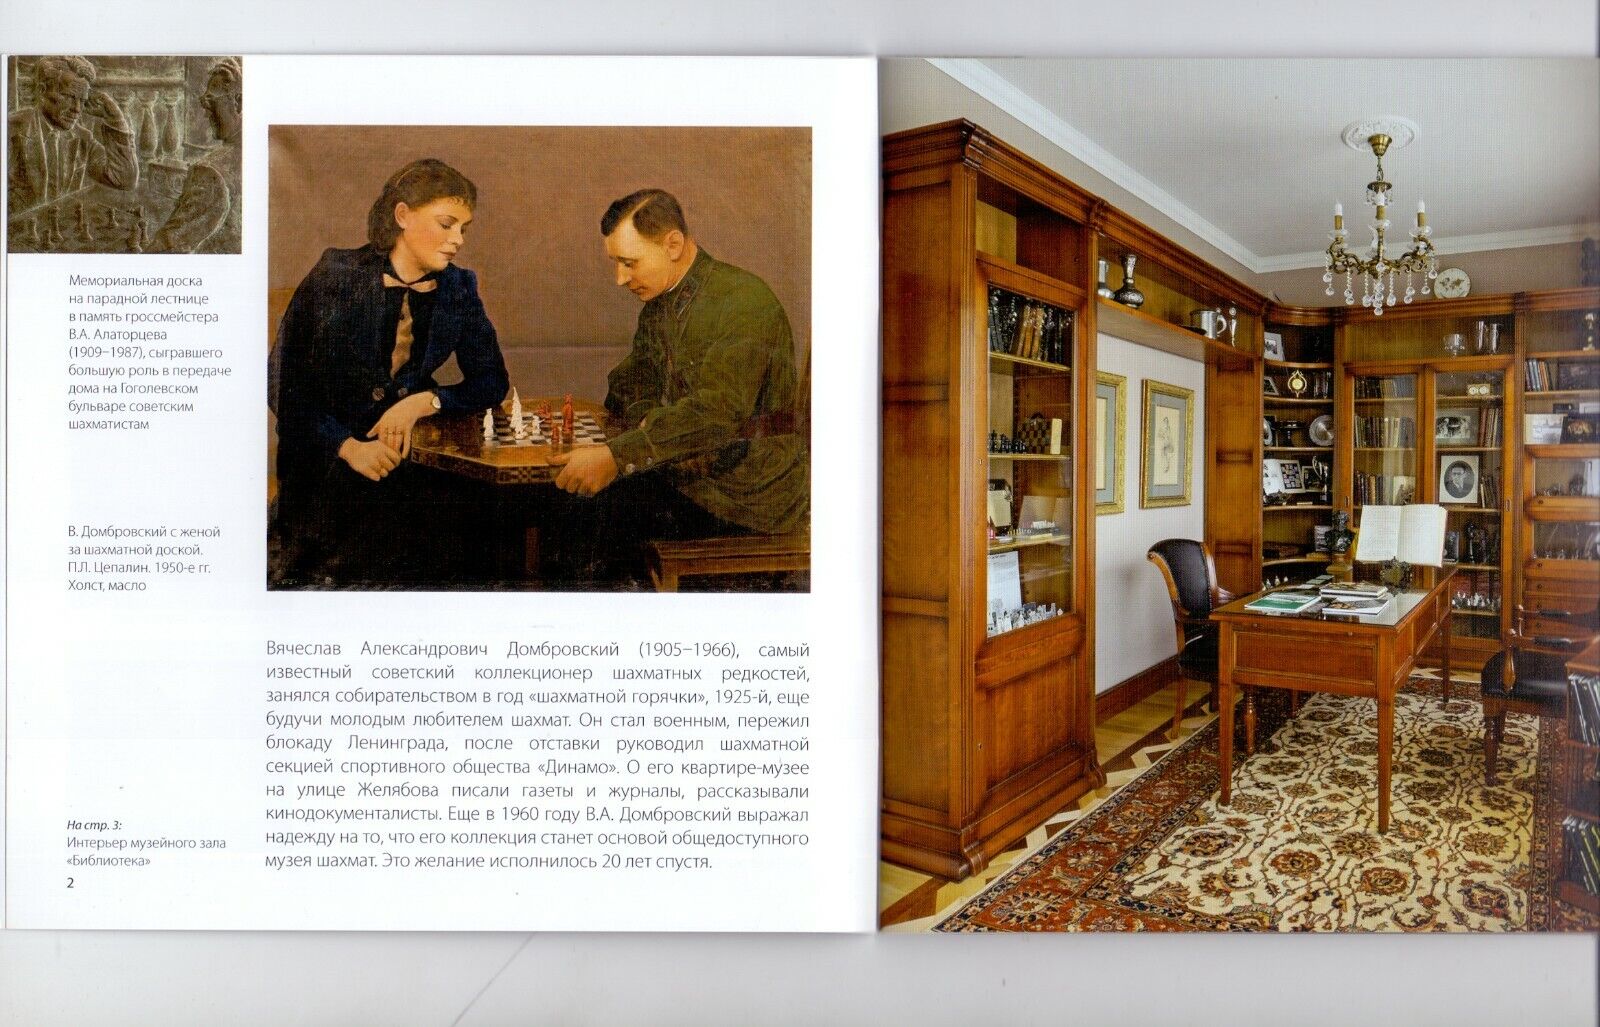 11492.Russian Chess Book. Сolor album. D. Oleynikov. The Chess Museum. 2019.